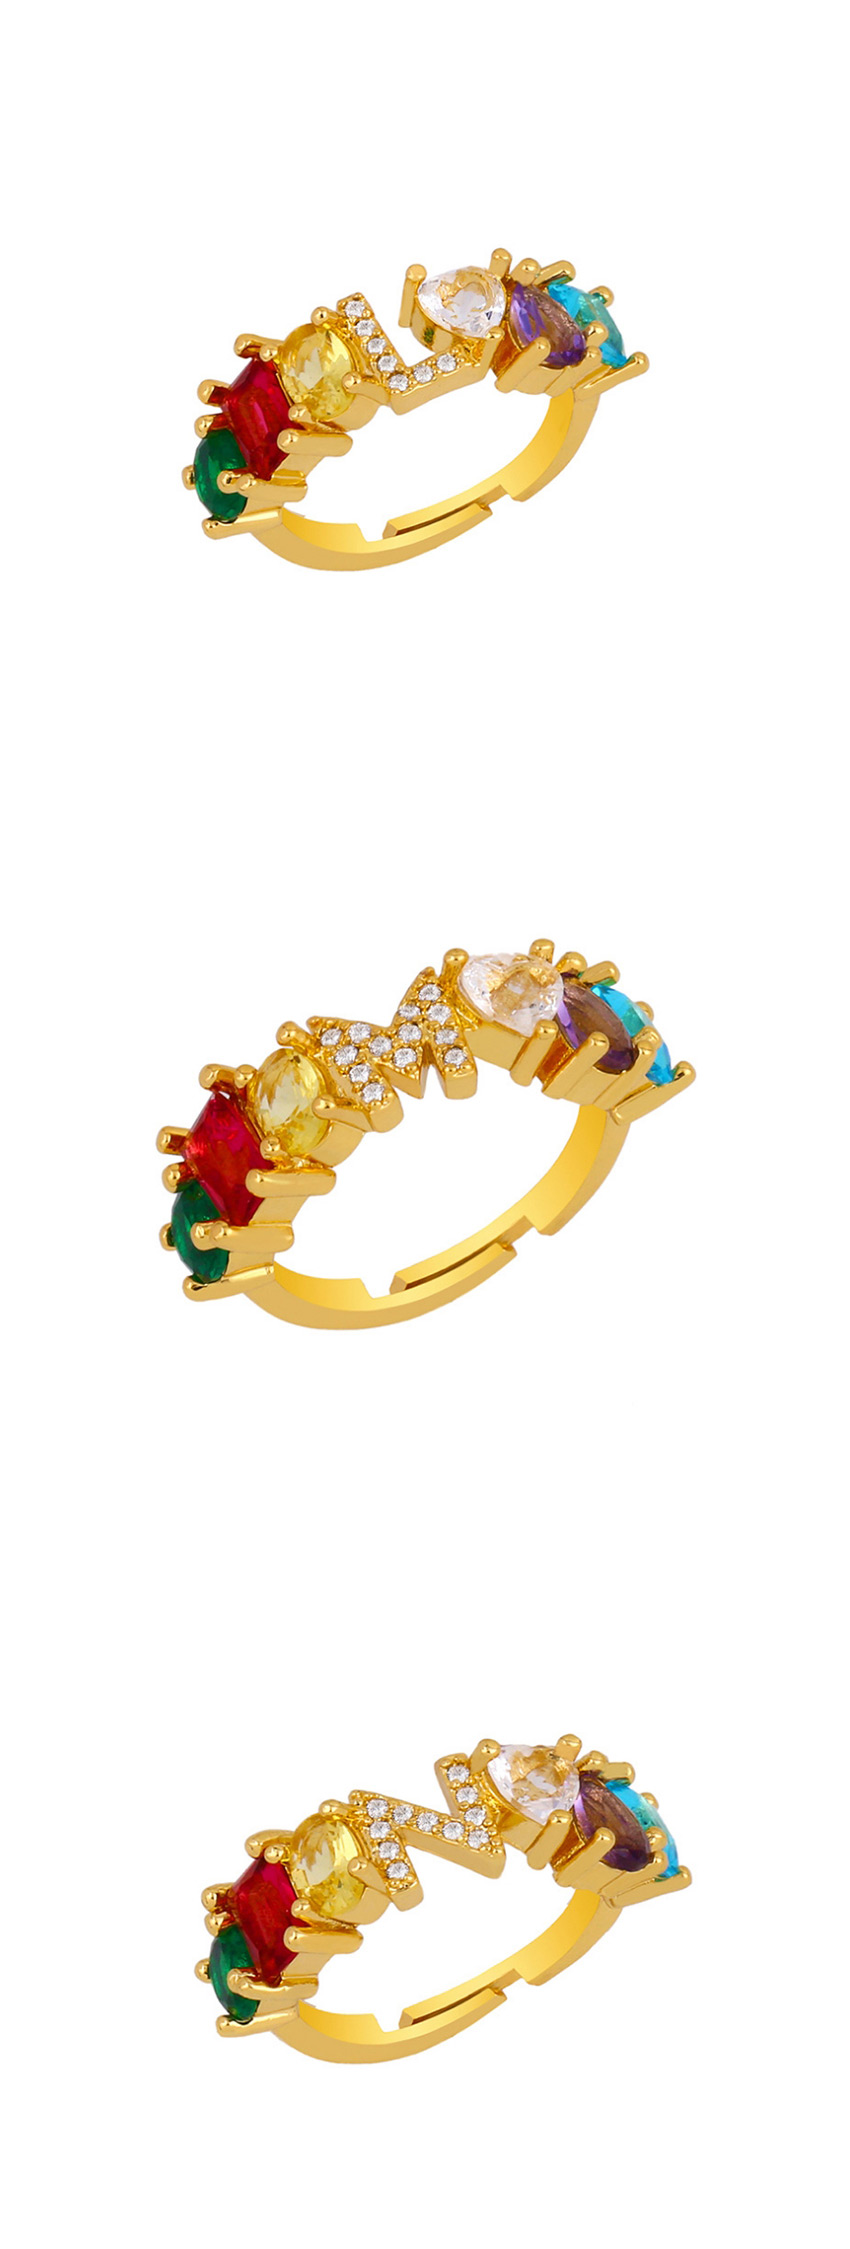 Fashion P Gold Heart-shaped Adjustable Ring With Colorful Diamond Letters,Rings